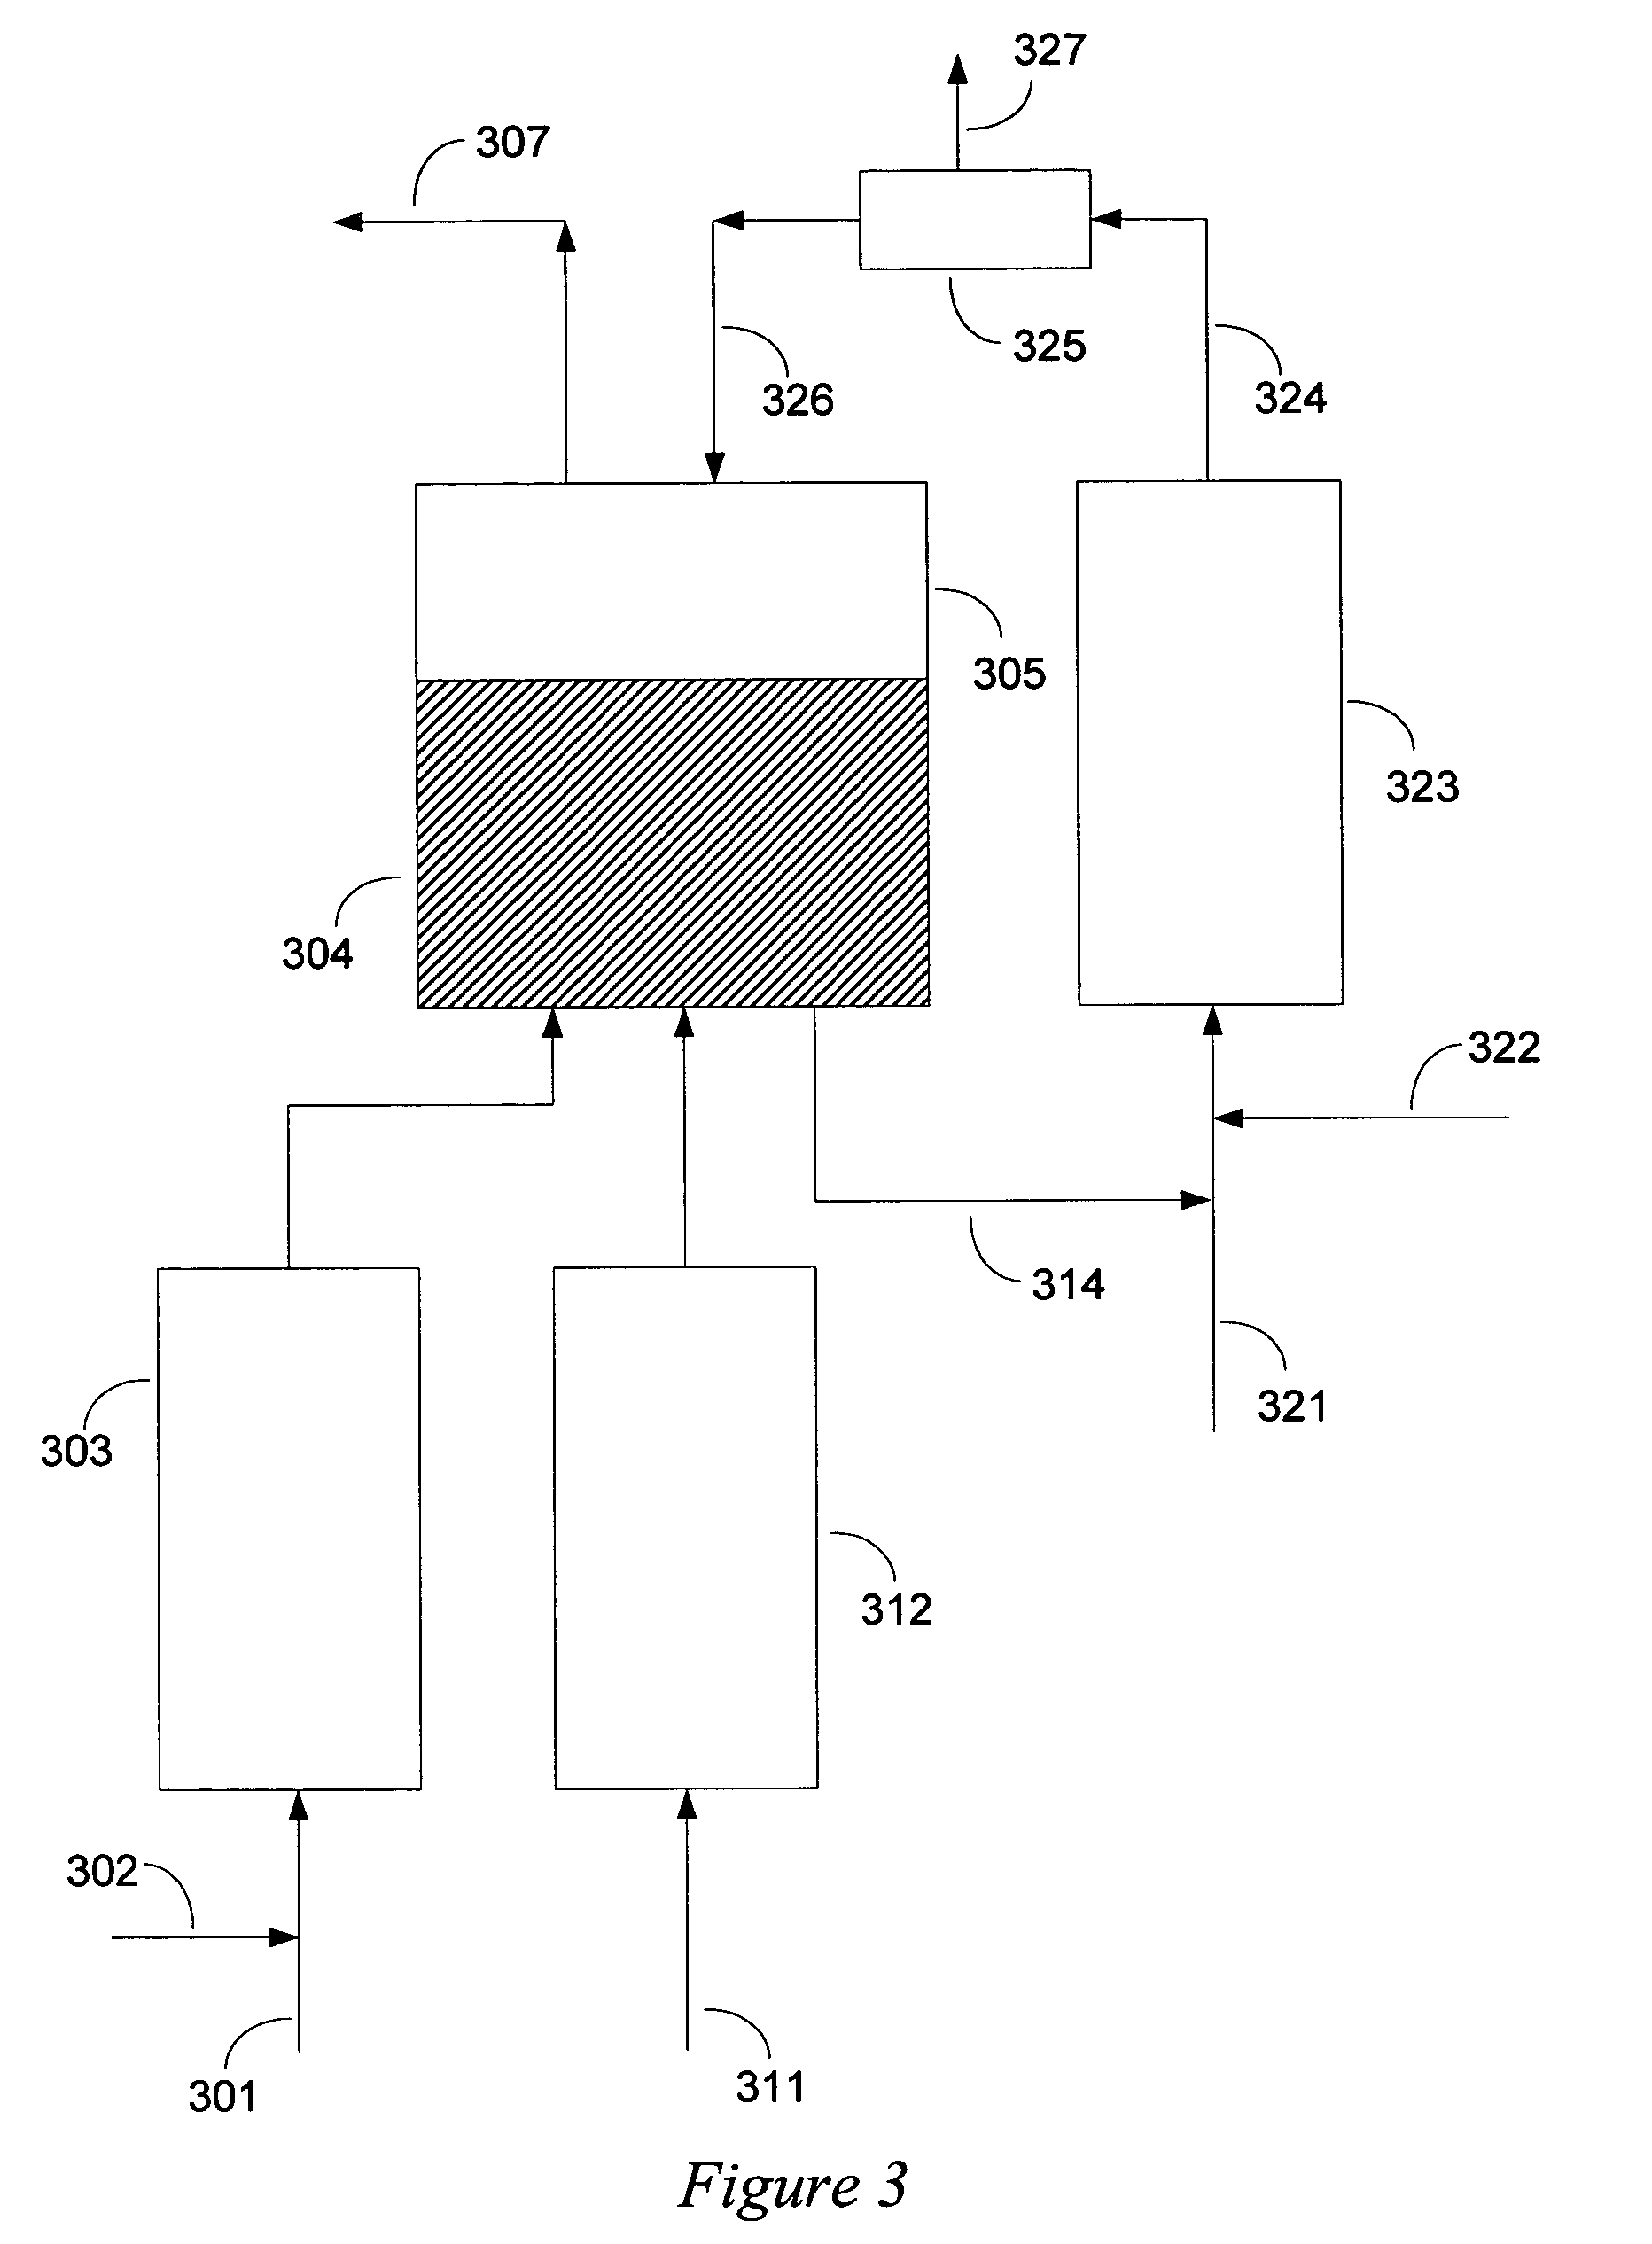 Method for making single-wall carbon nanotubes using supported catalysts